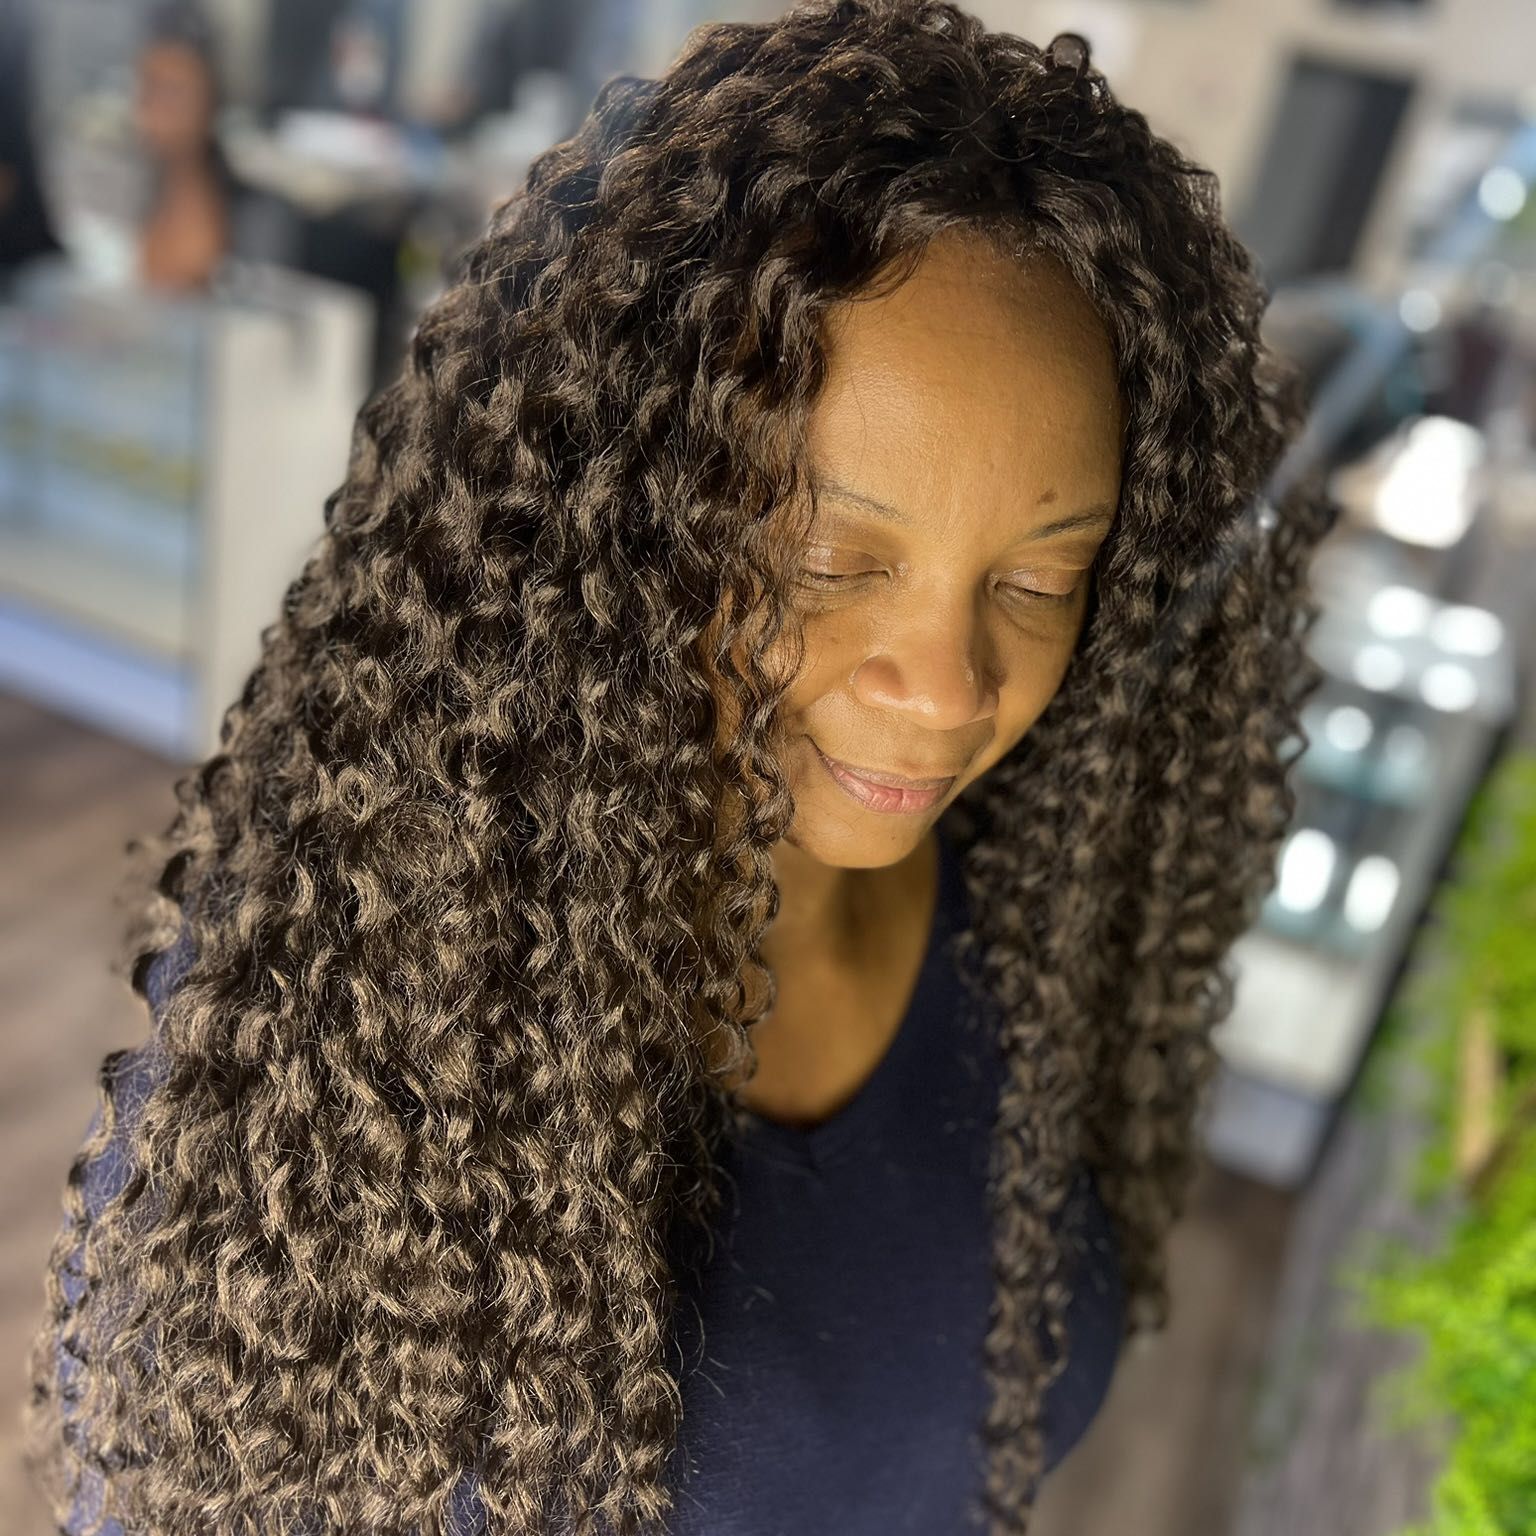 Crochet install full service with curly hair portfolio